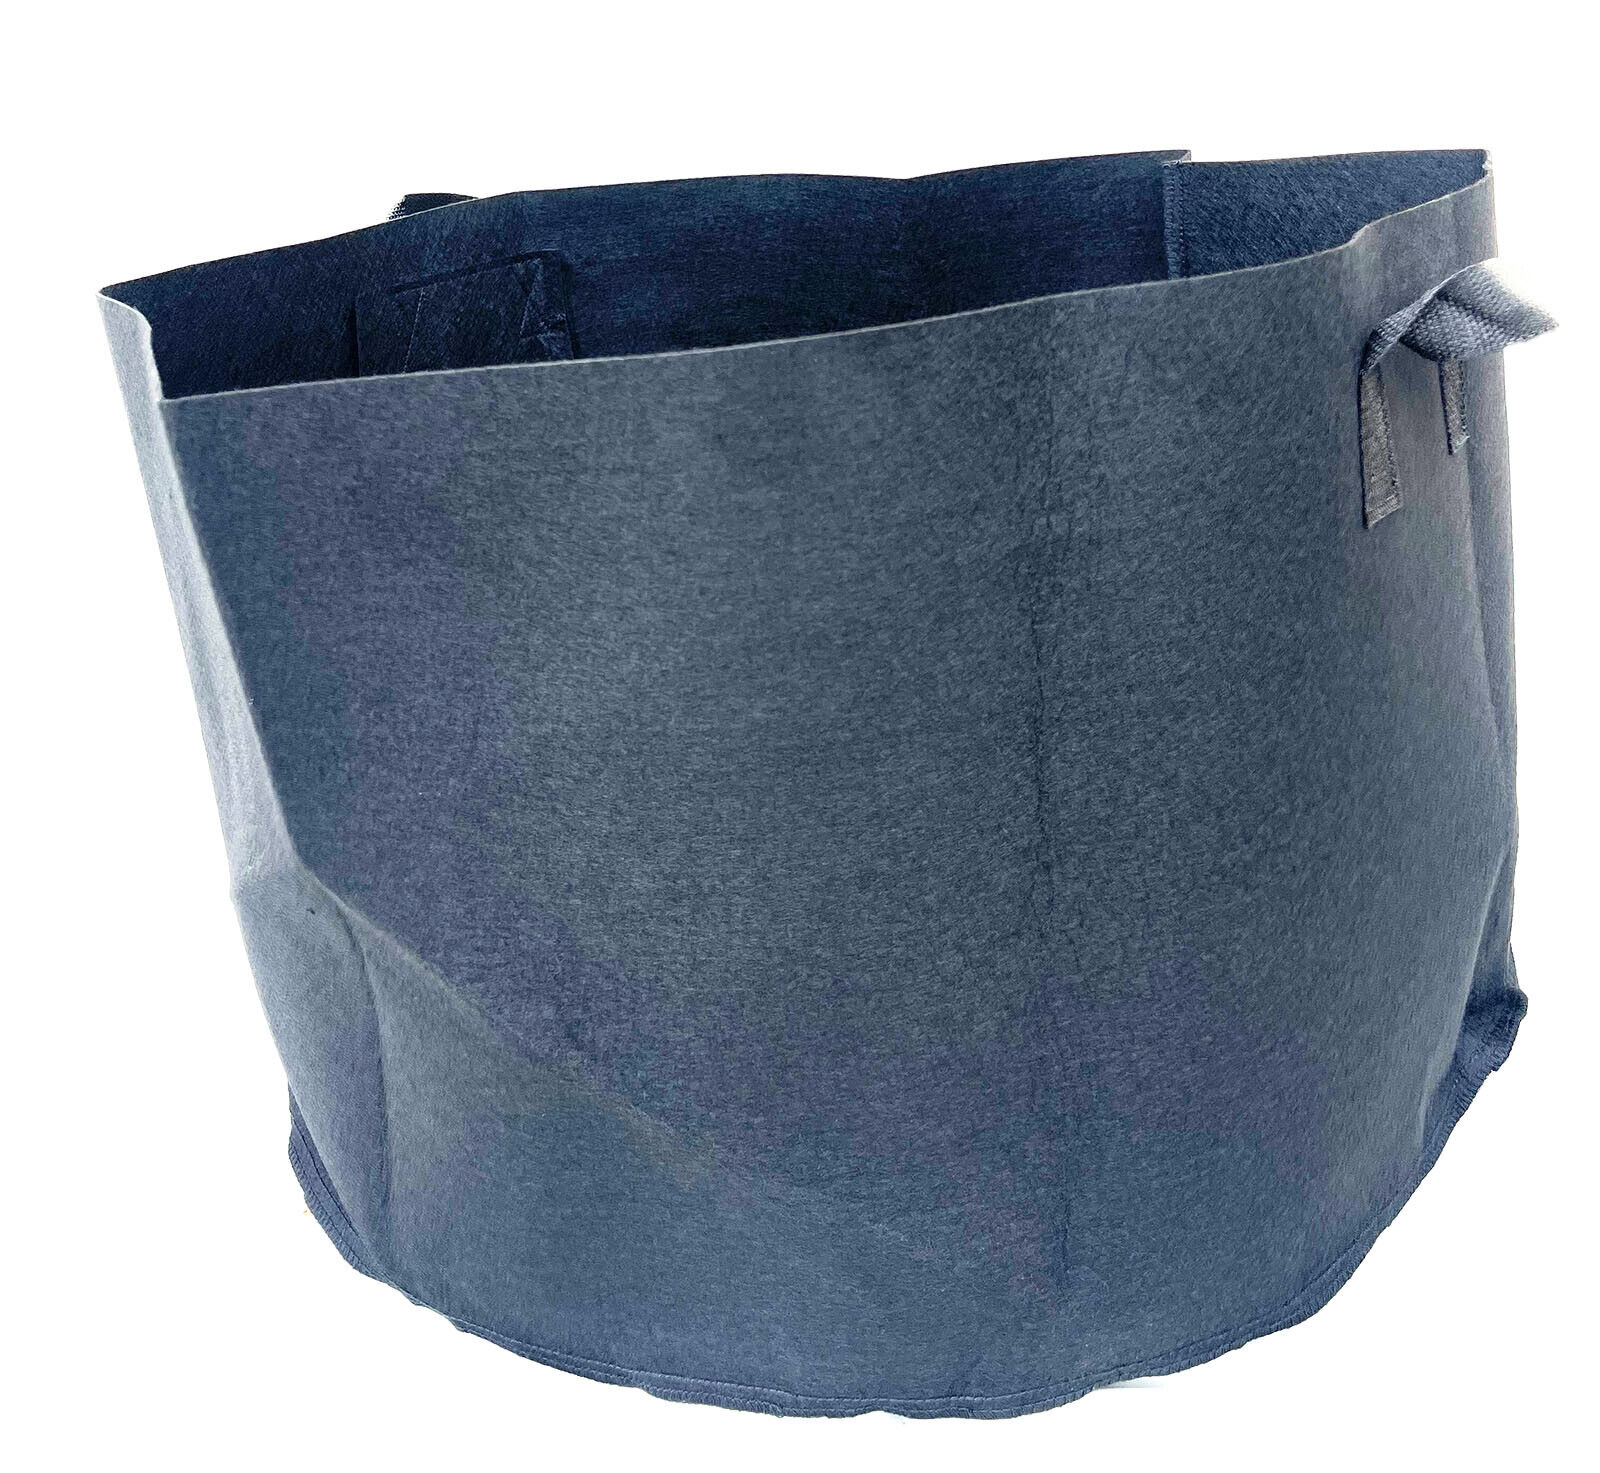 25 Gallon Grow Bags Cloth Planting Fabric Pot Growing Pouches for ...